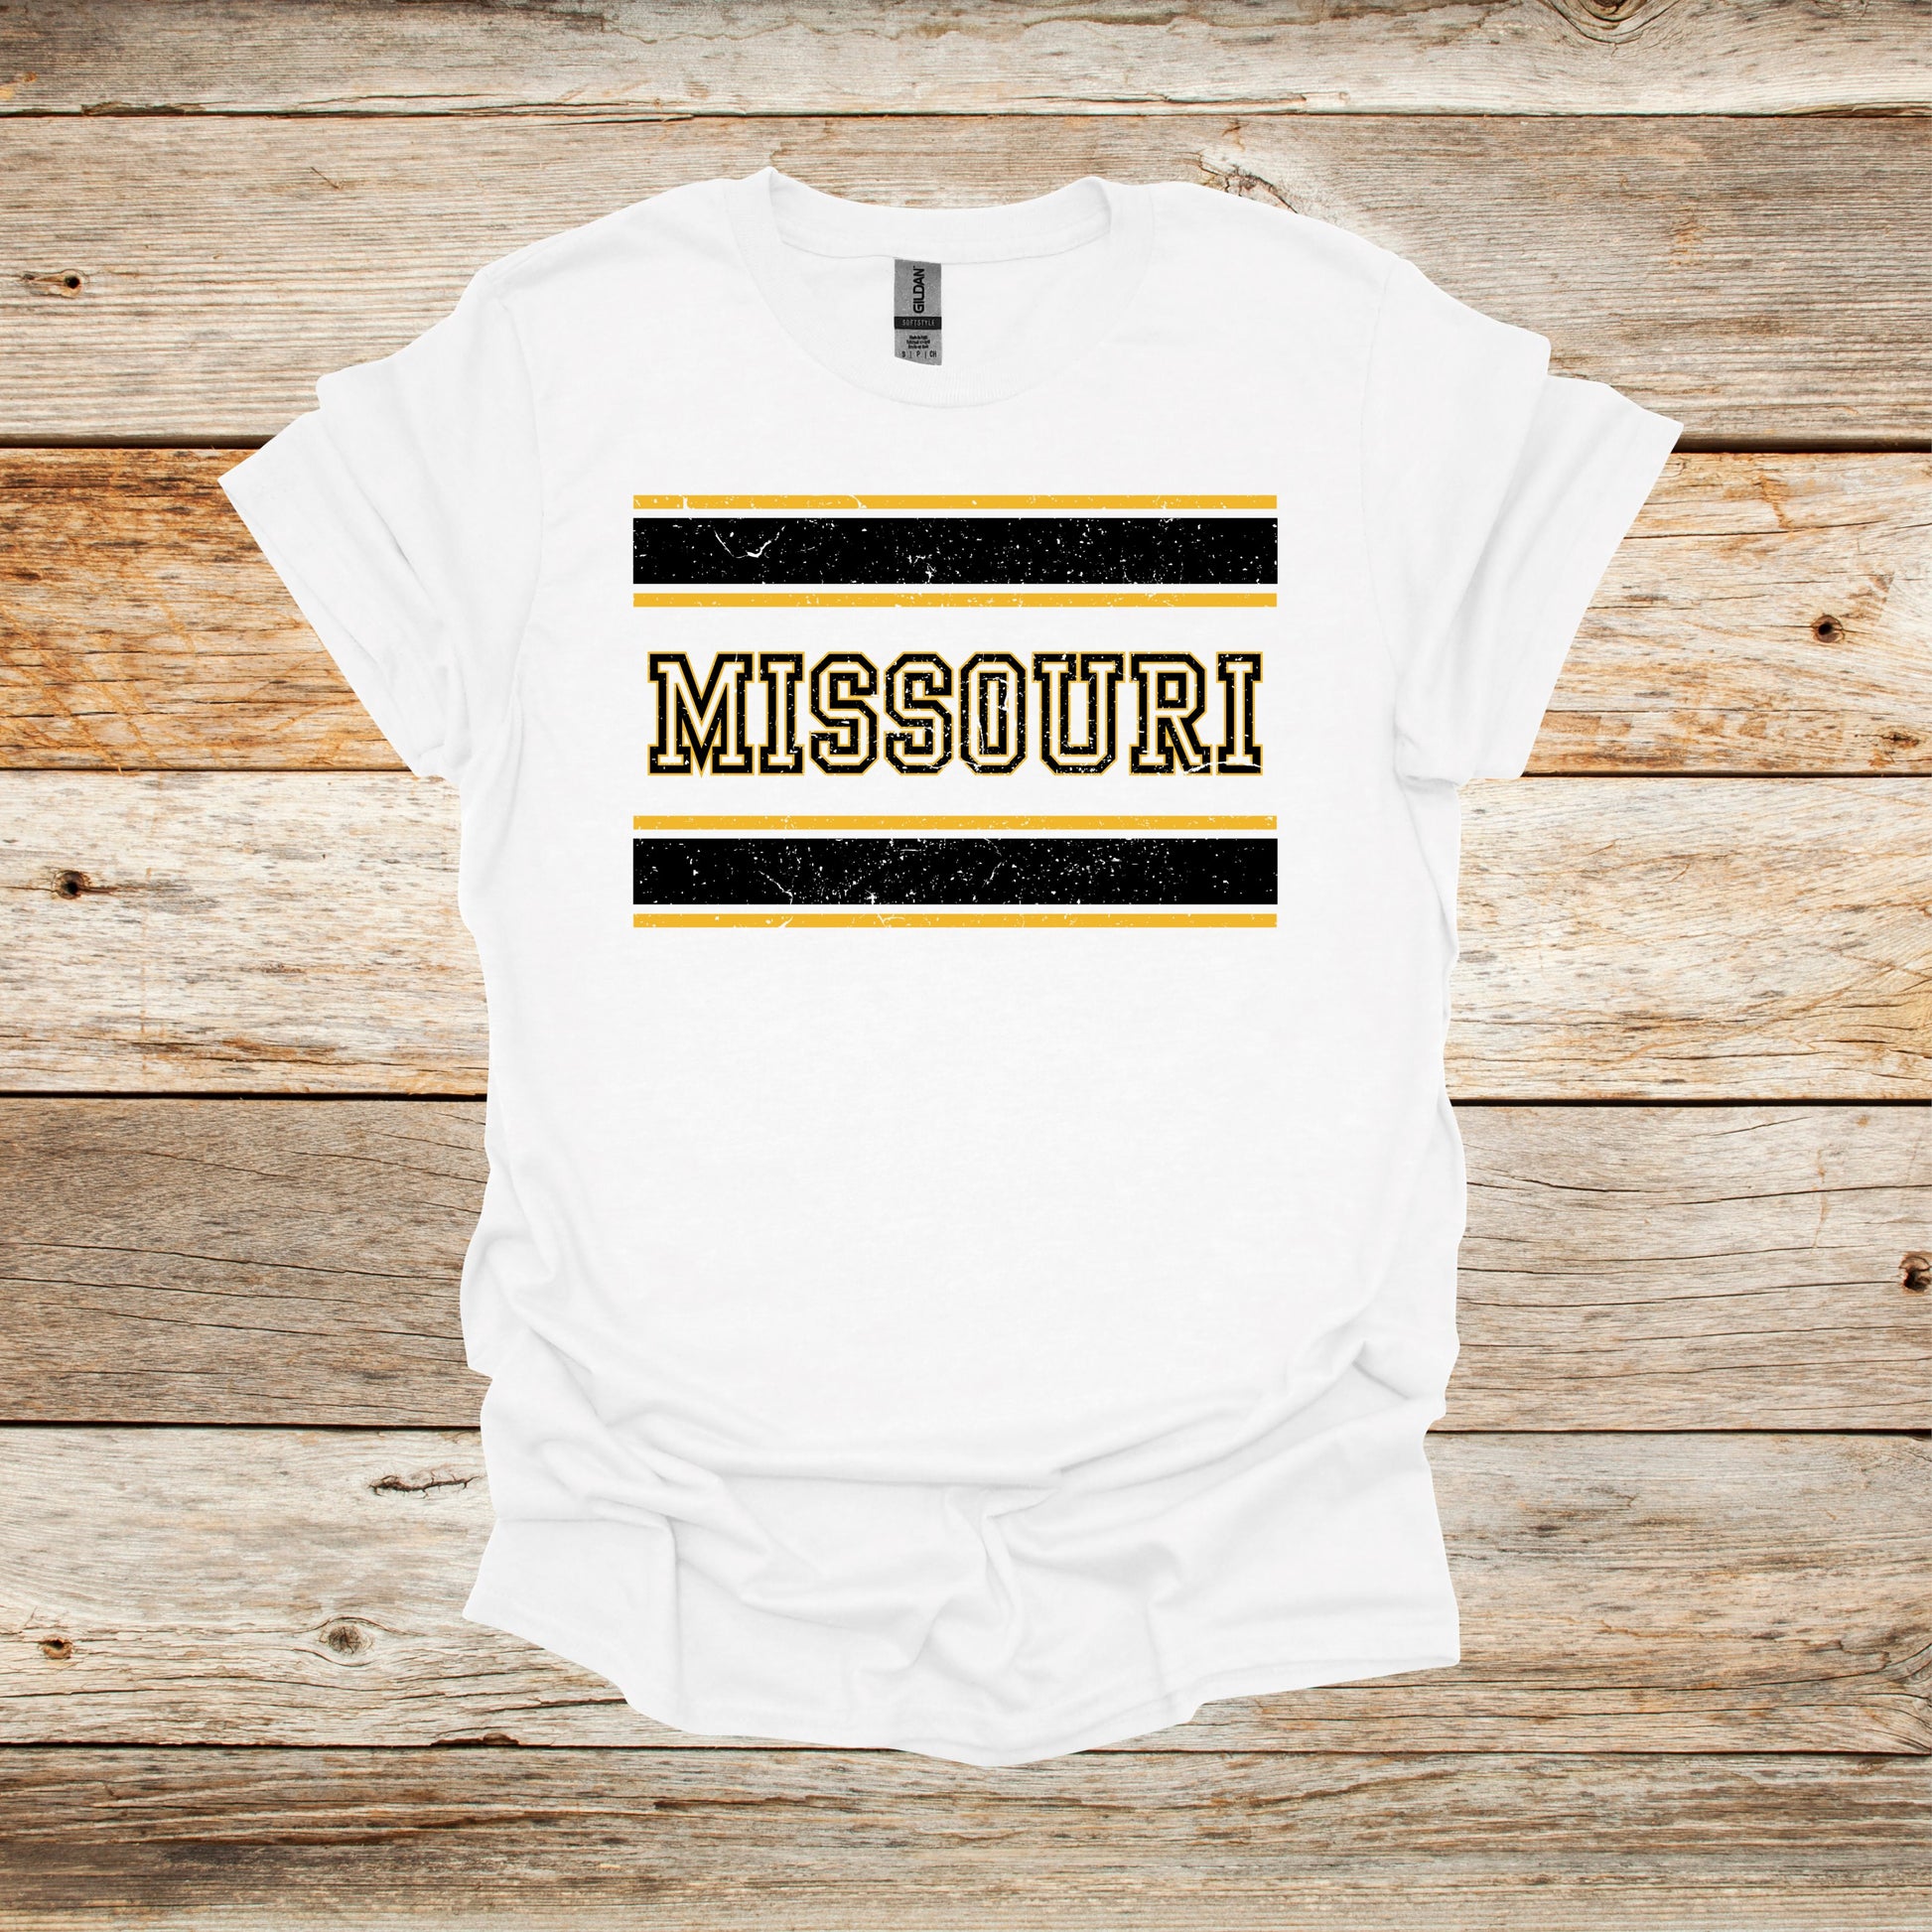 College T Shirt - Missouri Tigers - Adult and Children's Tee Shirts T-Shirts Graphic Avenue White Adult Small 